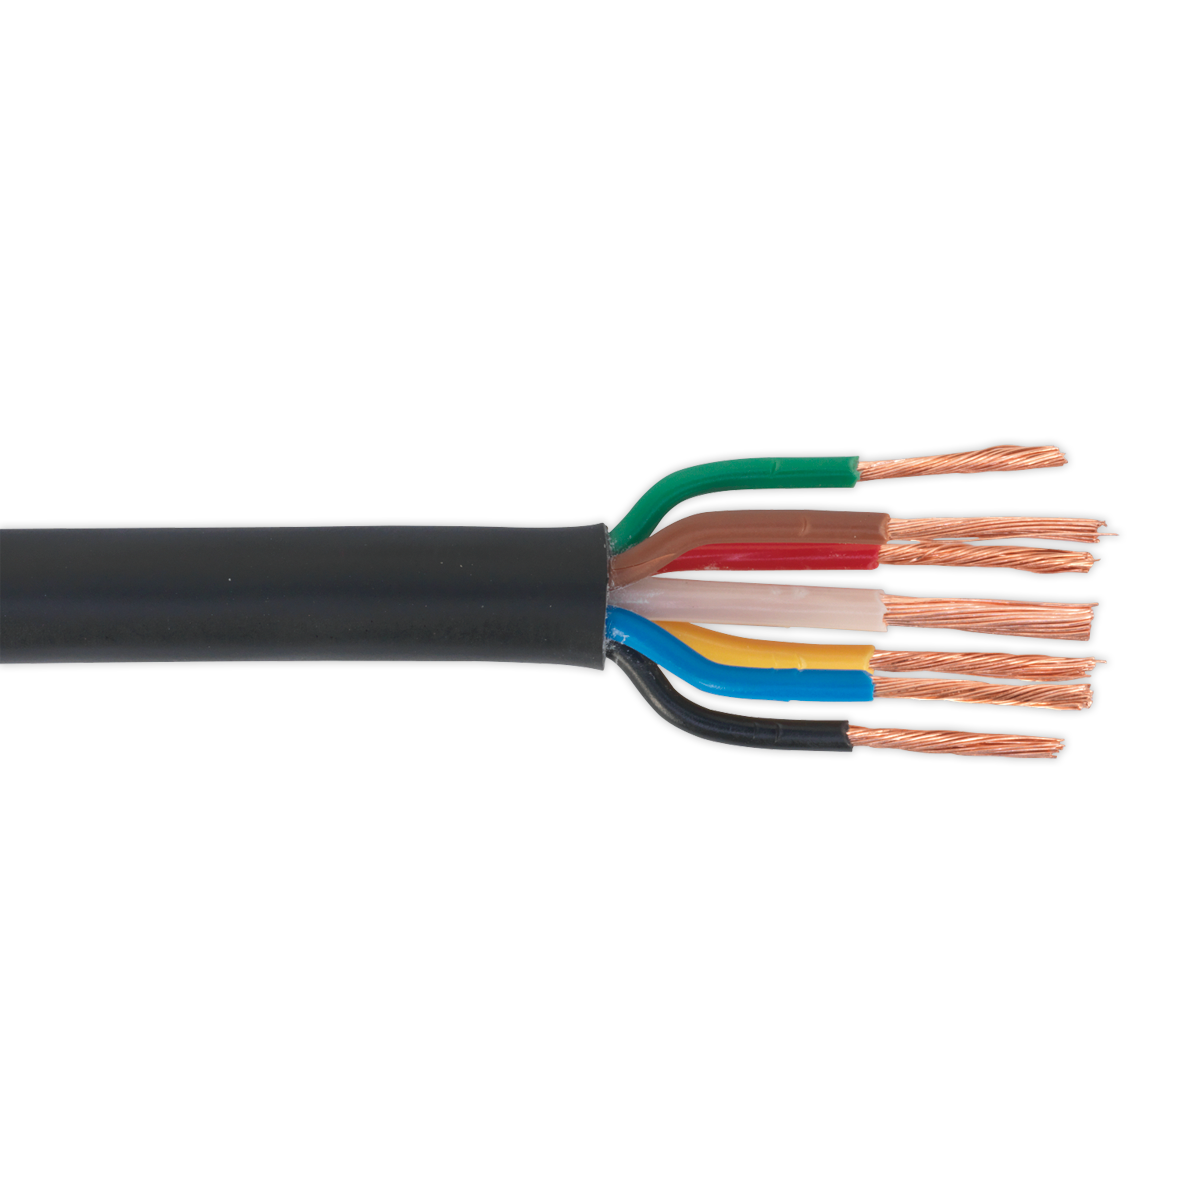 Sealey Automotive Cable Thin Wall 6 x 1mm² 32/0.20mm, 1 x 2mm² 28/0.30mm 30m Black